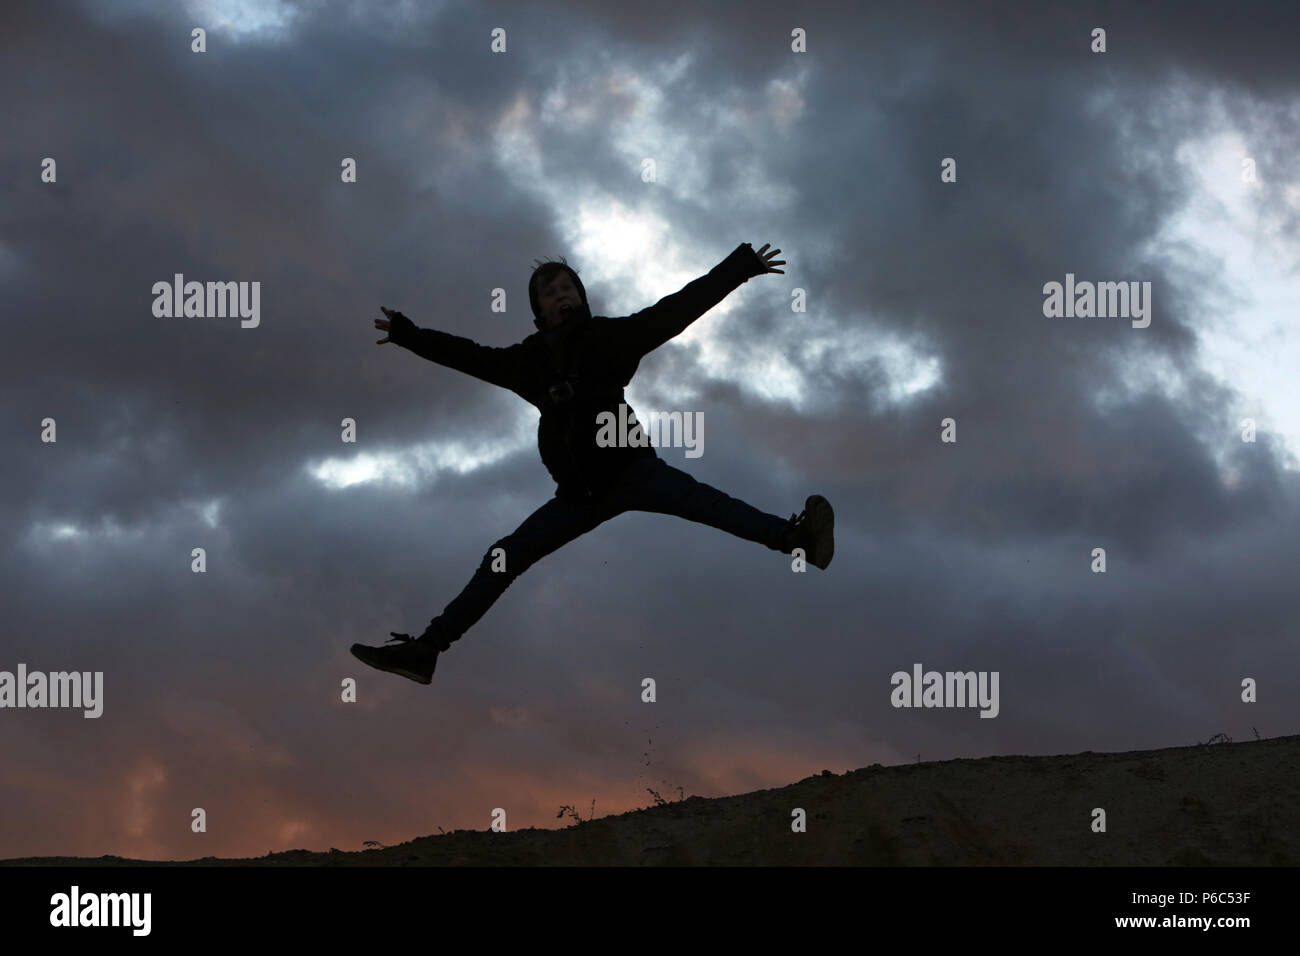 Wustrow, Germany - Silhouette, boy doing a splits in the air Stock Photo